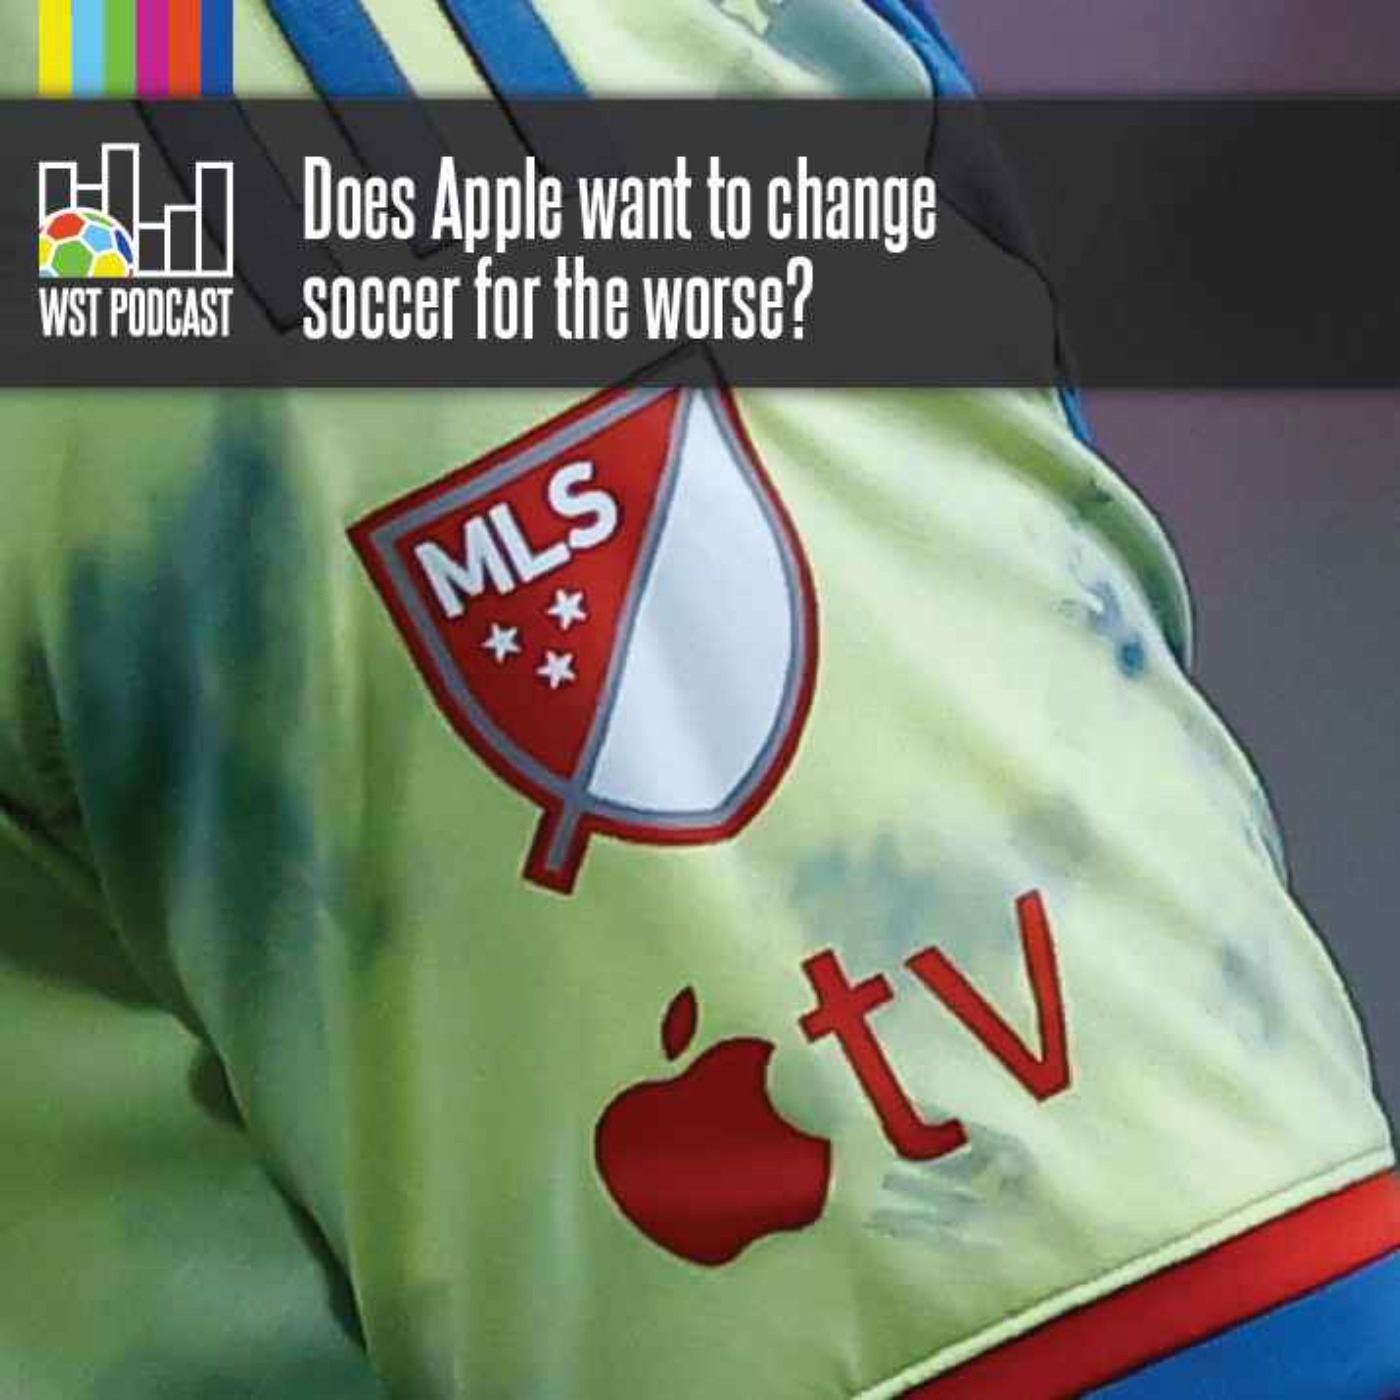 Does Apple want to change soccer for the worse?